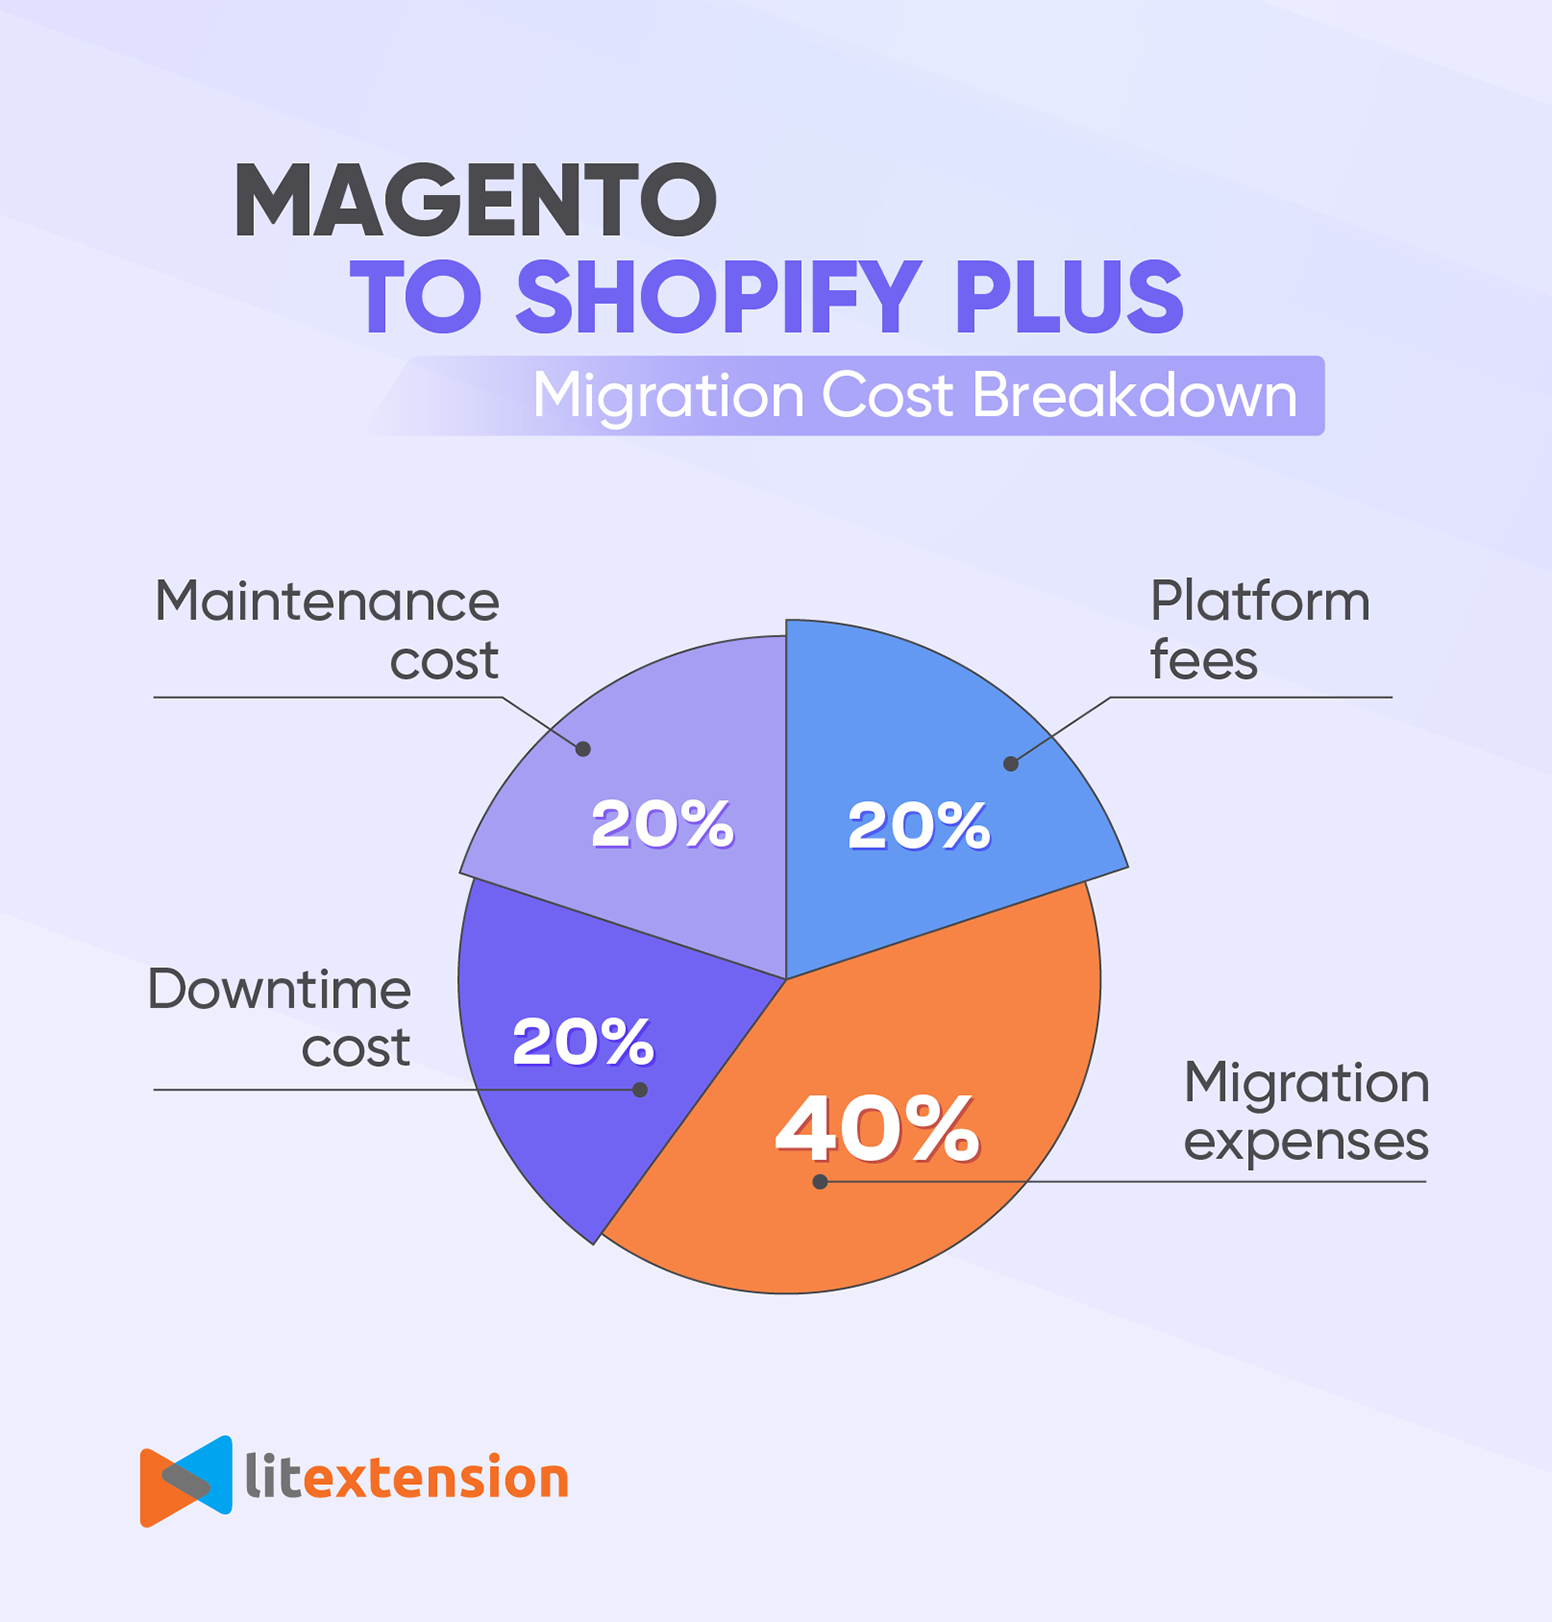 Magento to Shopify plus migration cost breakdown